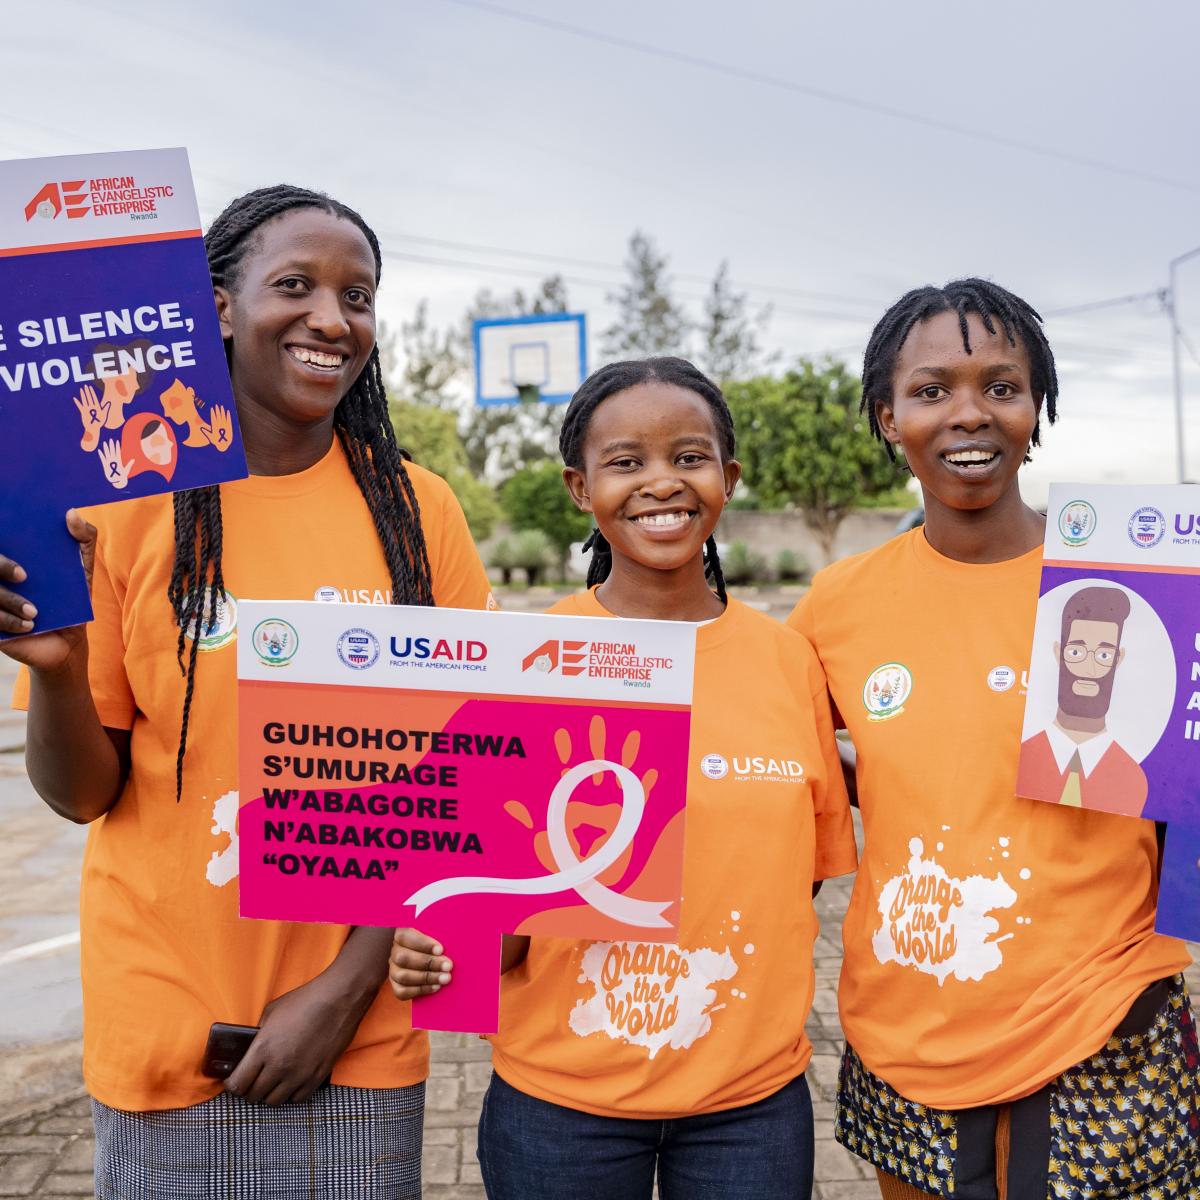 Loyce with friends advocating against gender-based violence.